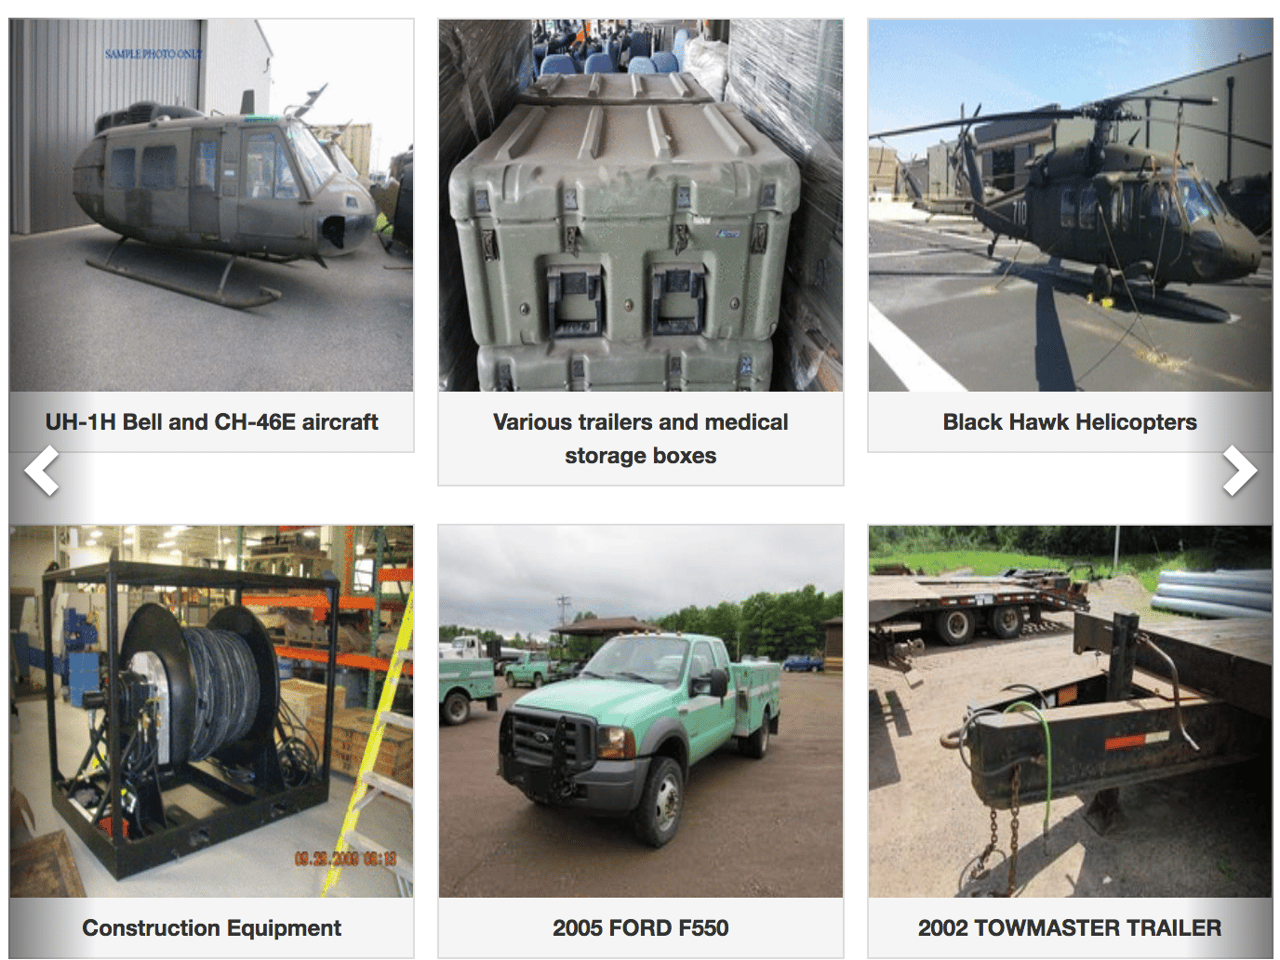 Six examples of things you can buy from a government auction, such as a pickup truck, helicopters, and medical storage boxes